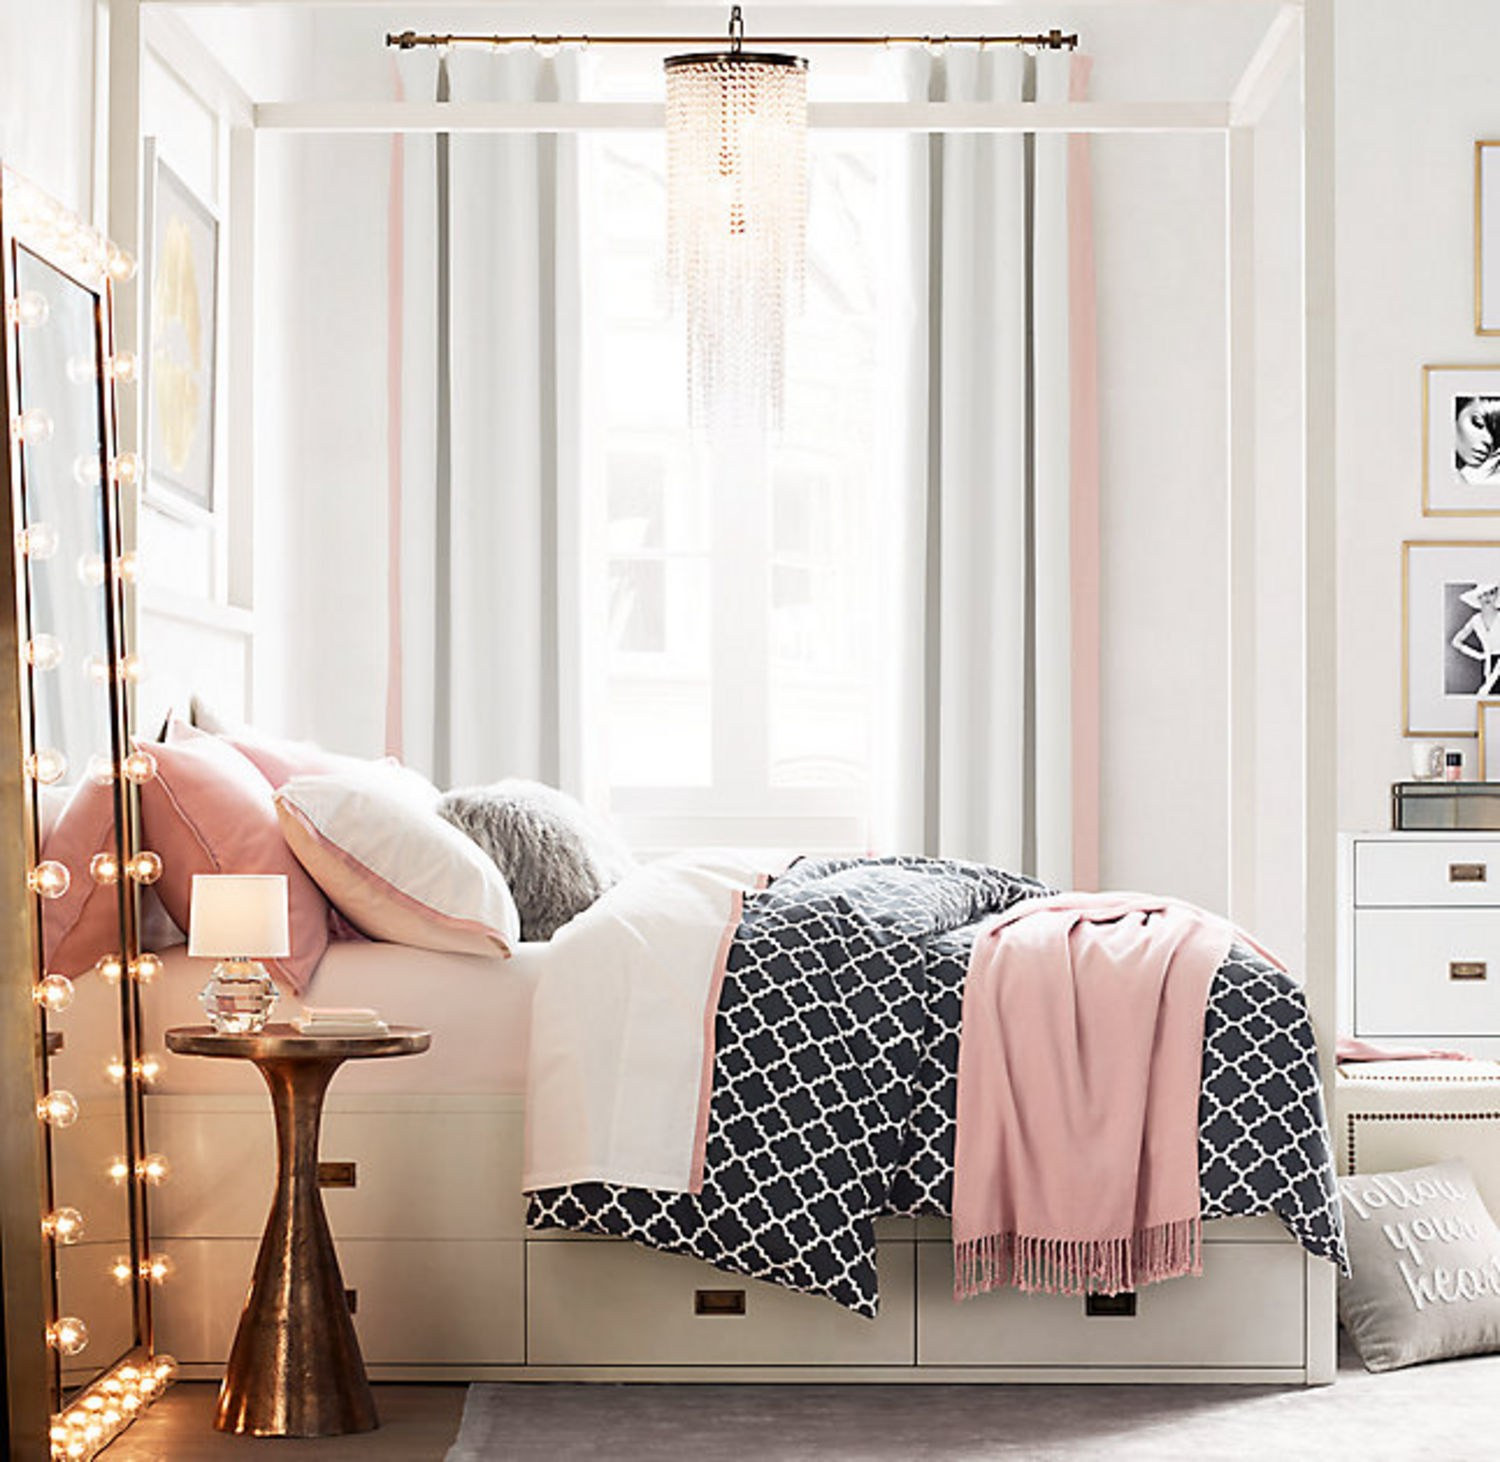 Small Apartment Bedroom
 13 Things Your Tiny Apartment Needs From Restoration